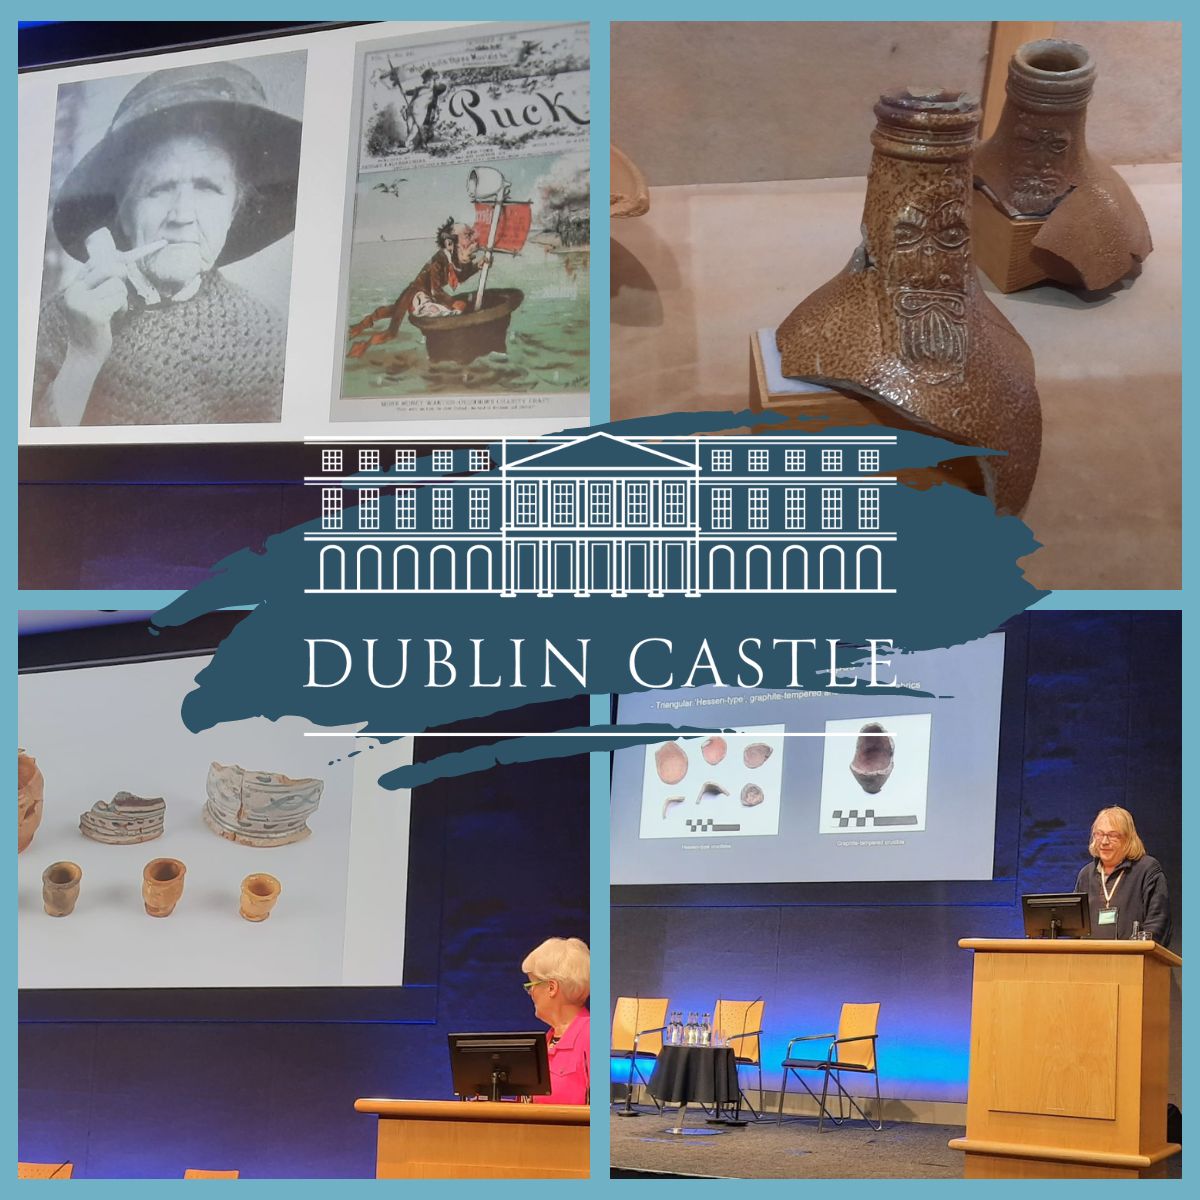 An amazing time at the @dublincastleOPW Conference last week for two of our team members. Elaine Lynch and Hannah Preston learned about the fascinating artefacts uncovered during the excavations of the North-West Tower: clay pipes, wig curlers, pottery and more! #Irisharchaeology